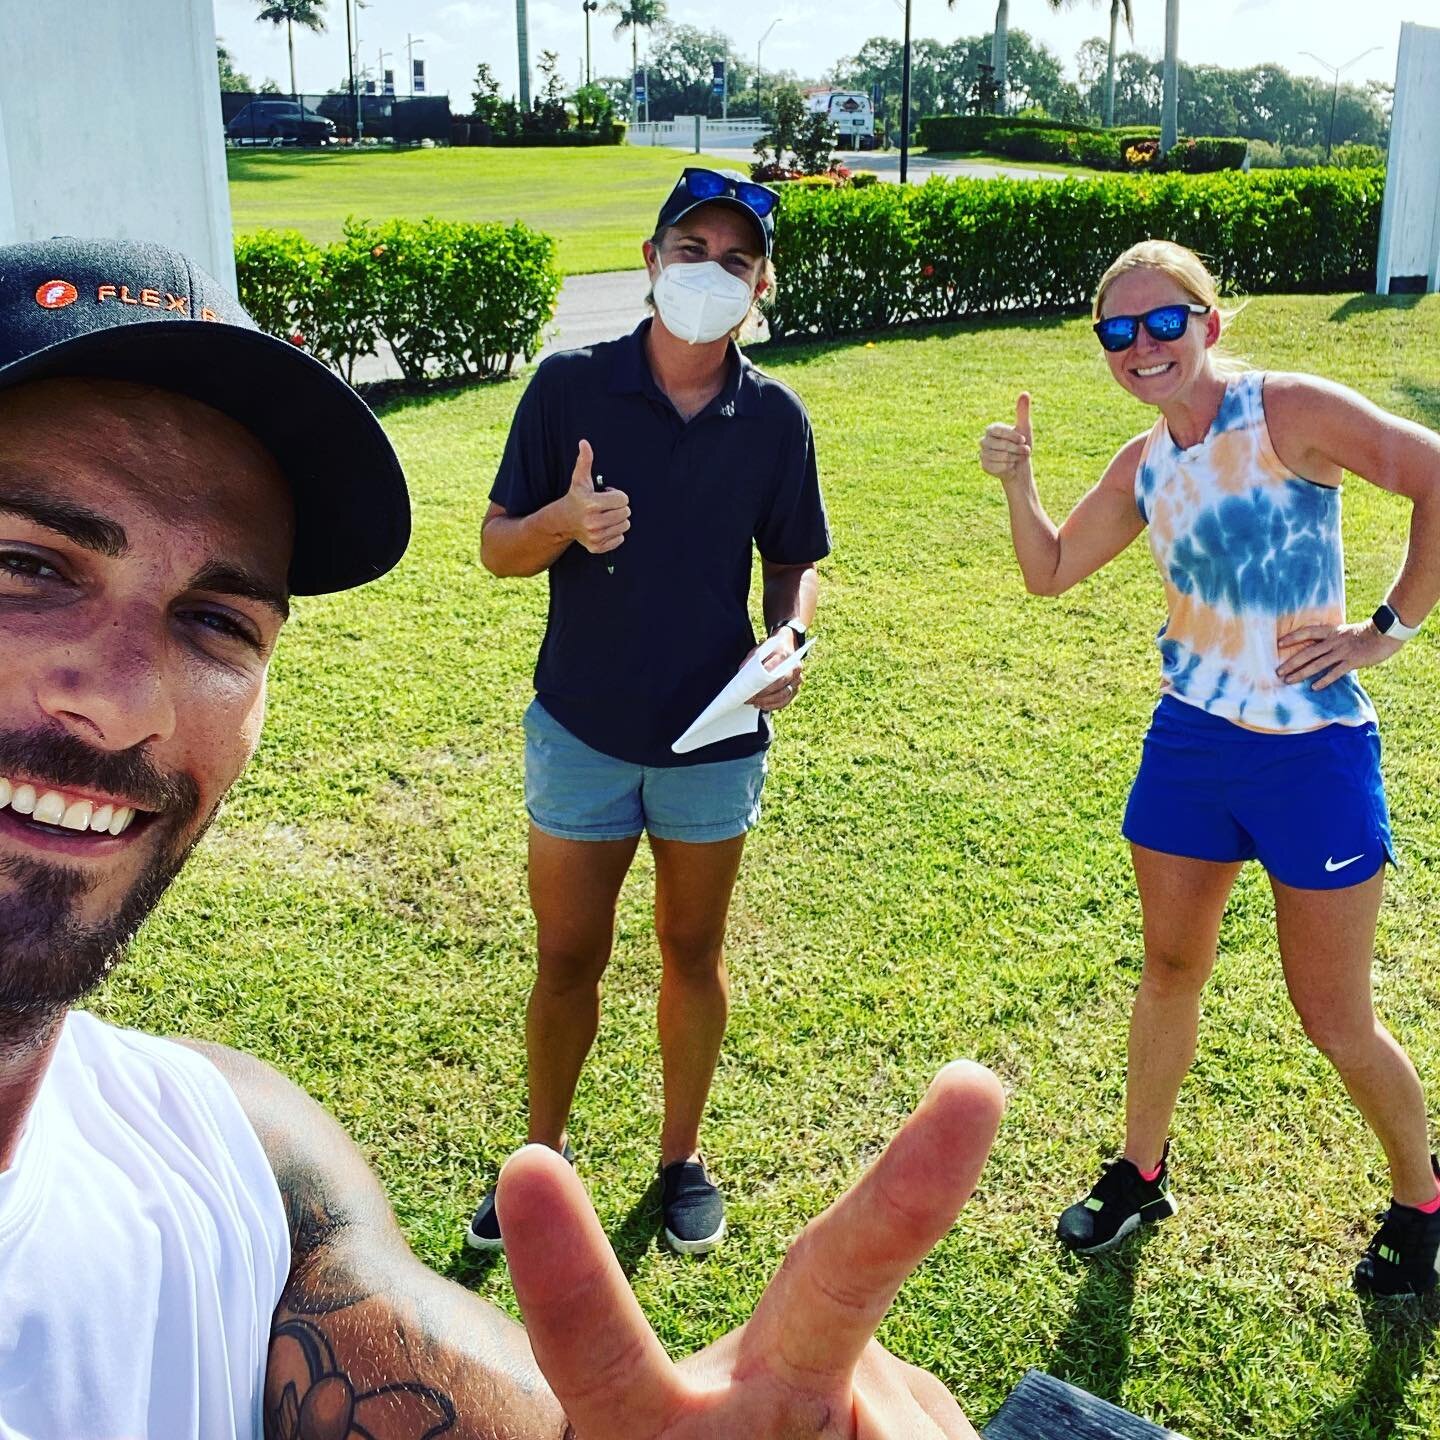 #FBF To officially signing the dotted line of Flex Fitness&rsquo;s HOME @nathanbendersonpark 💪🏼💯🌴#justthebeginning #nathanbendersonpark #sarasota #gym #personaltrainers #fitness #fit #sunshine #FlexFitnessFL #Flex #couplegoals #motivation #dream 